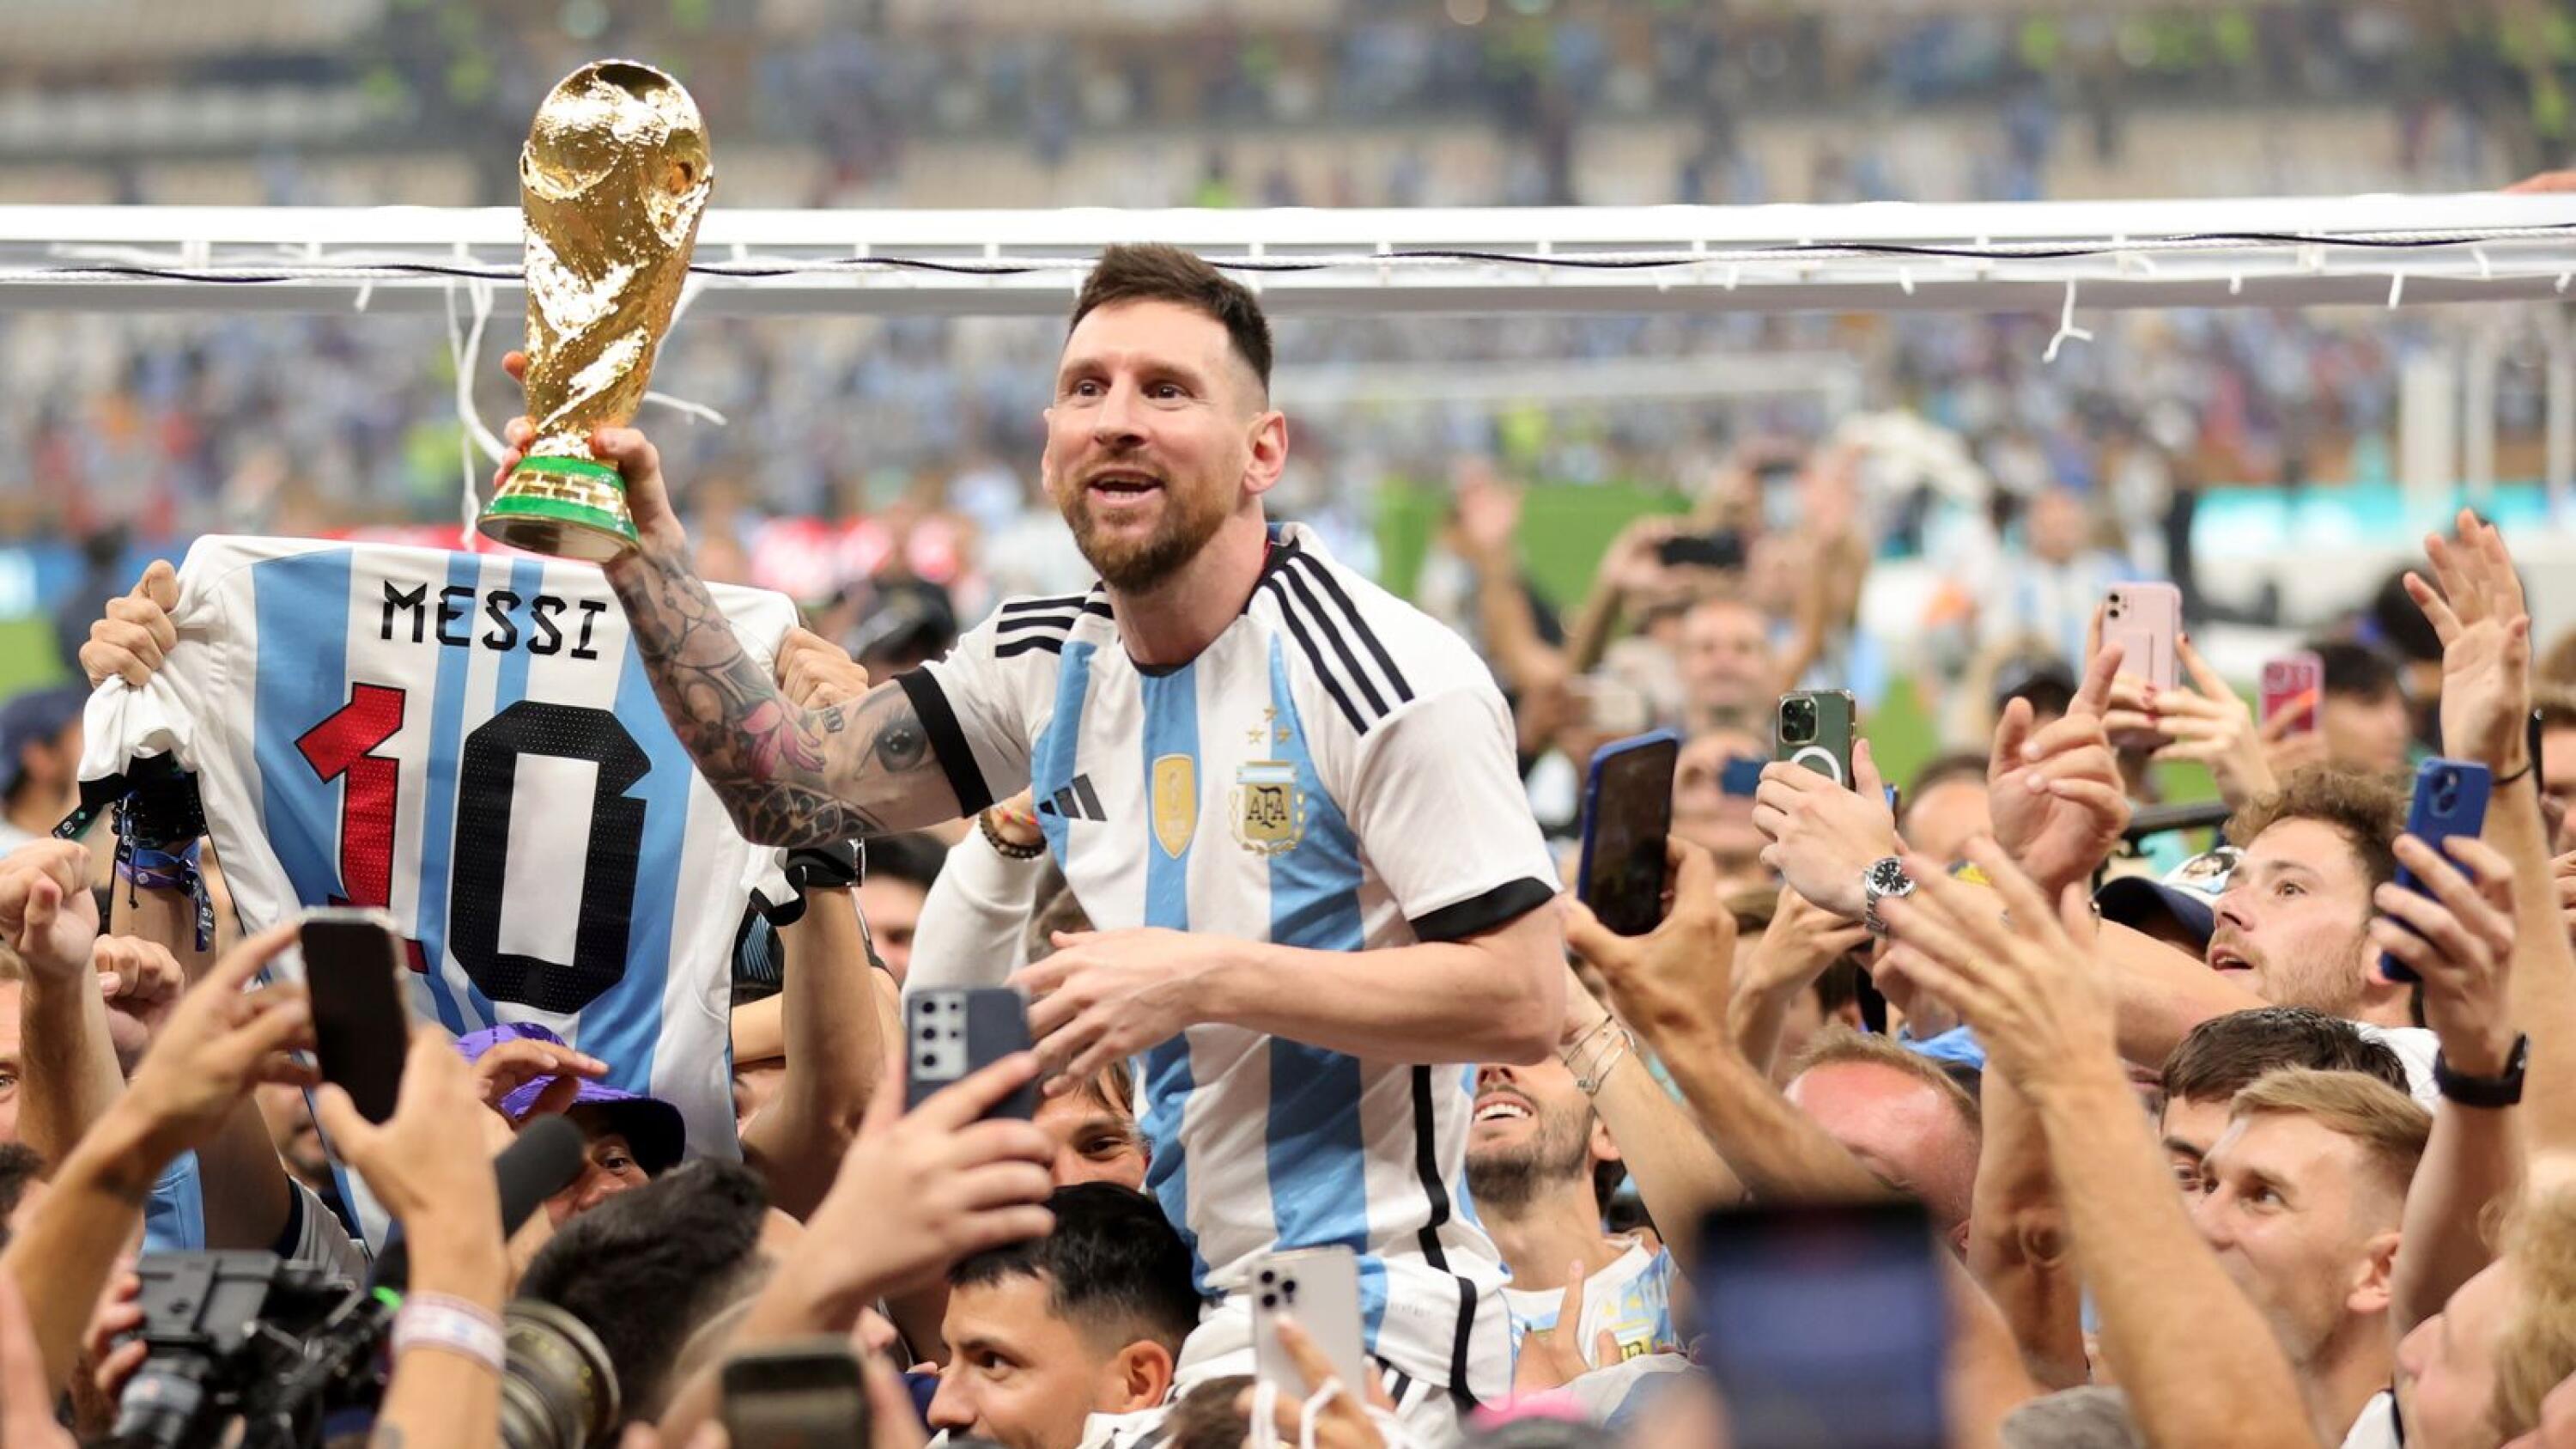 Lionel Messi (centre) of Argentina lifts the World Cup trophy after winning the FIFA World Cup 2022 final